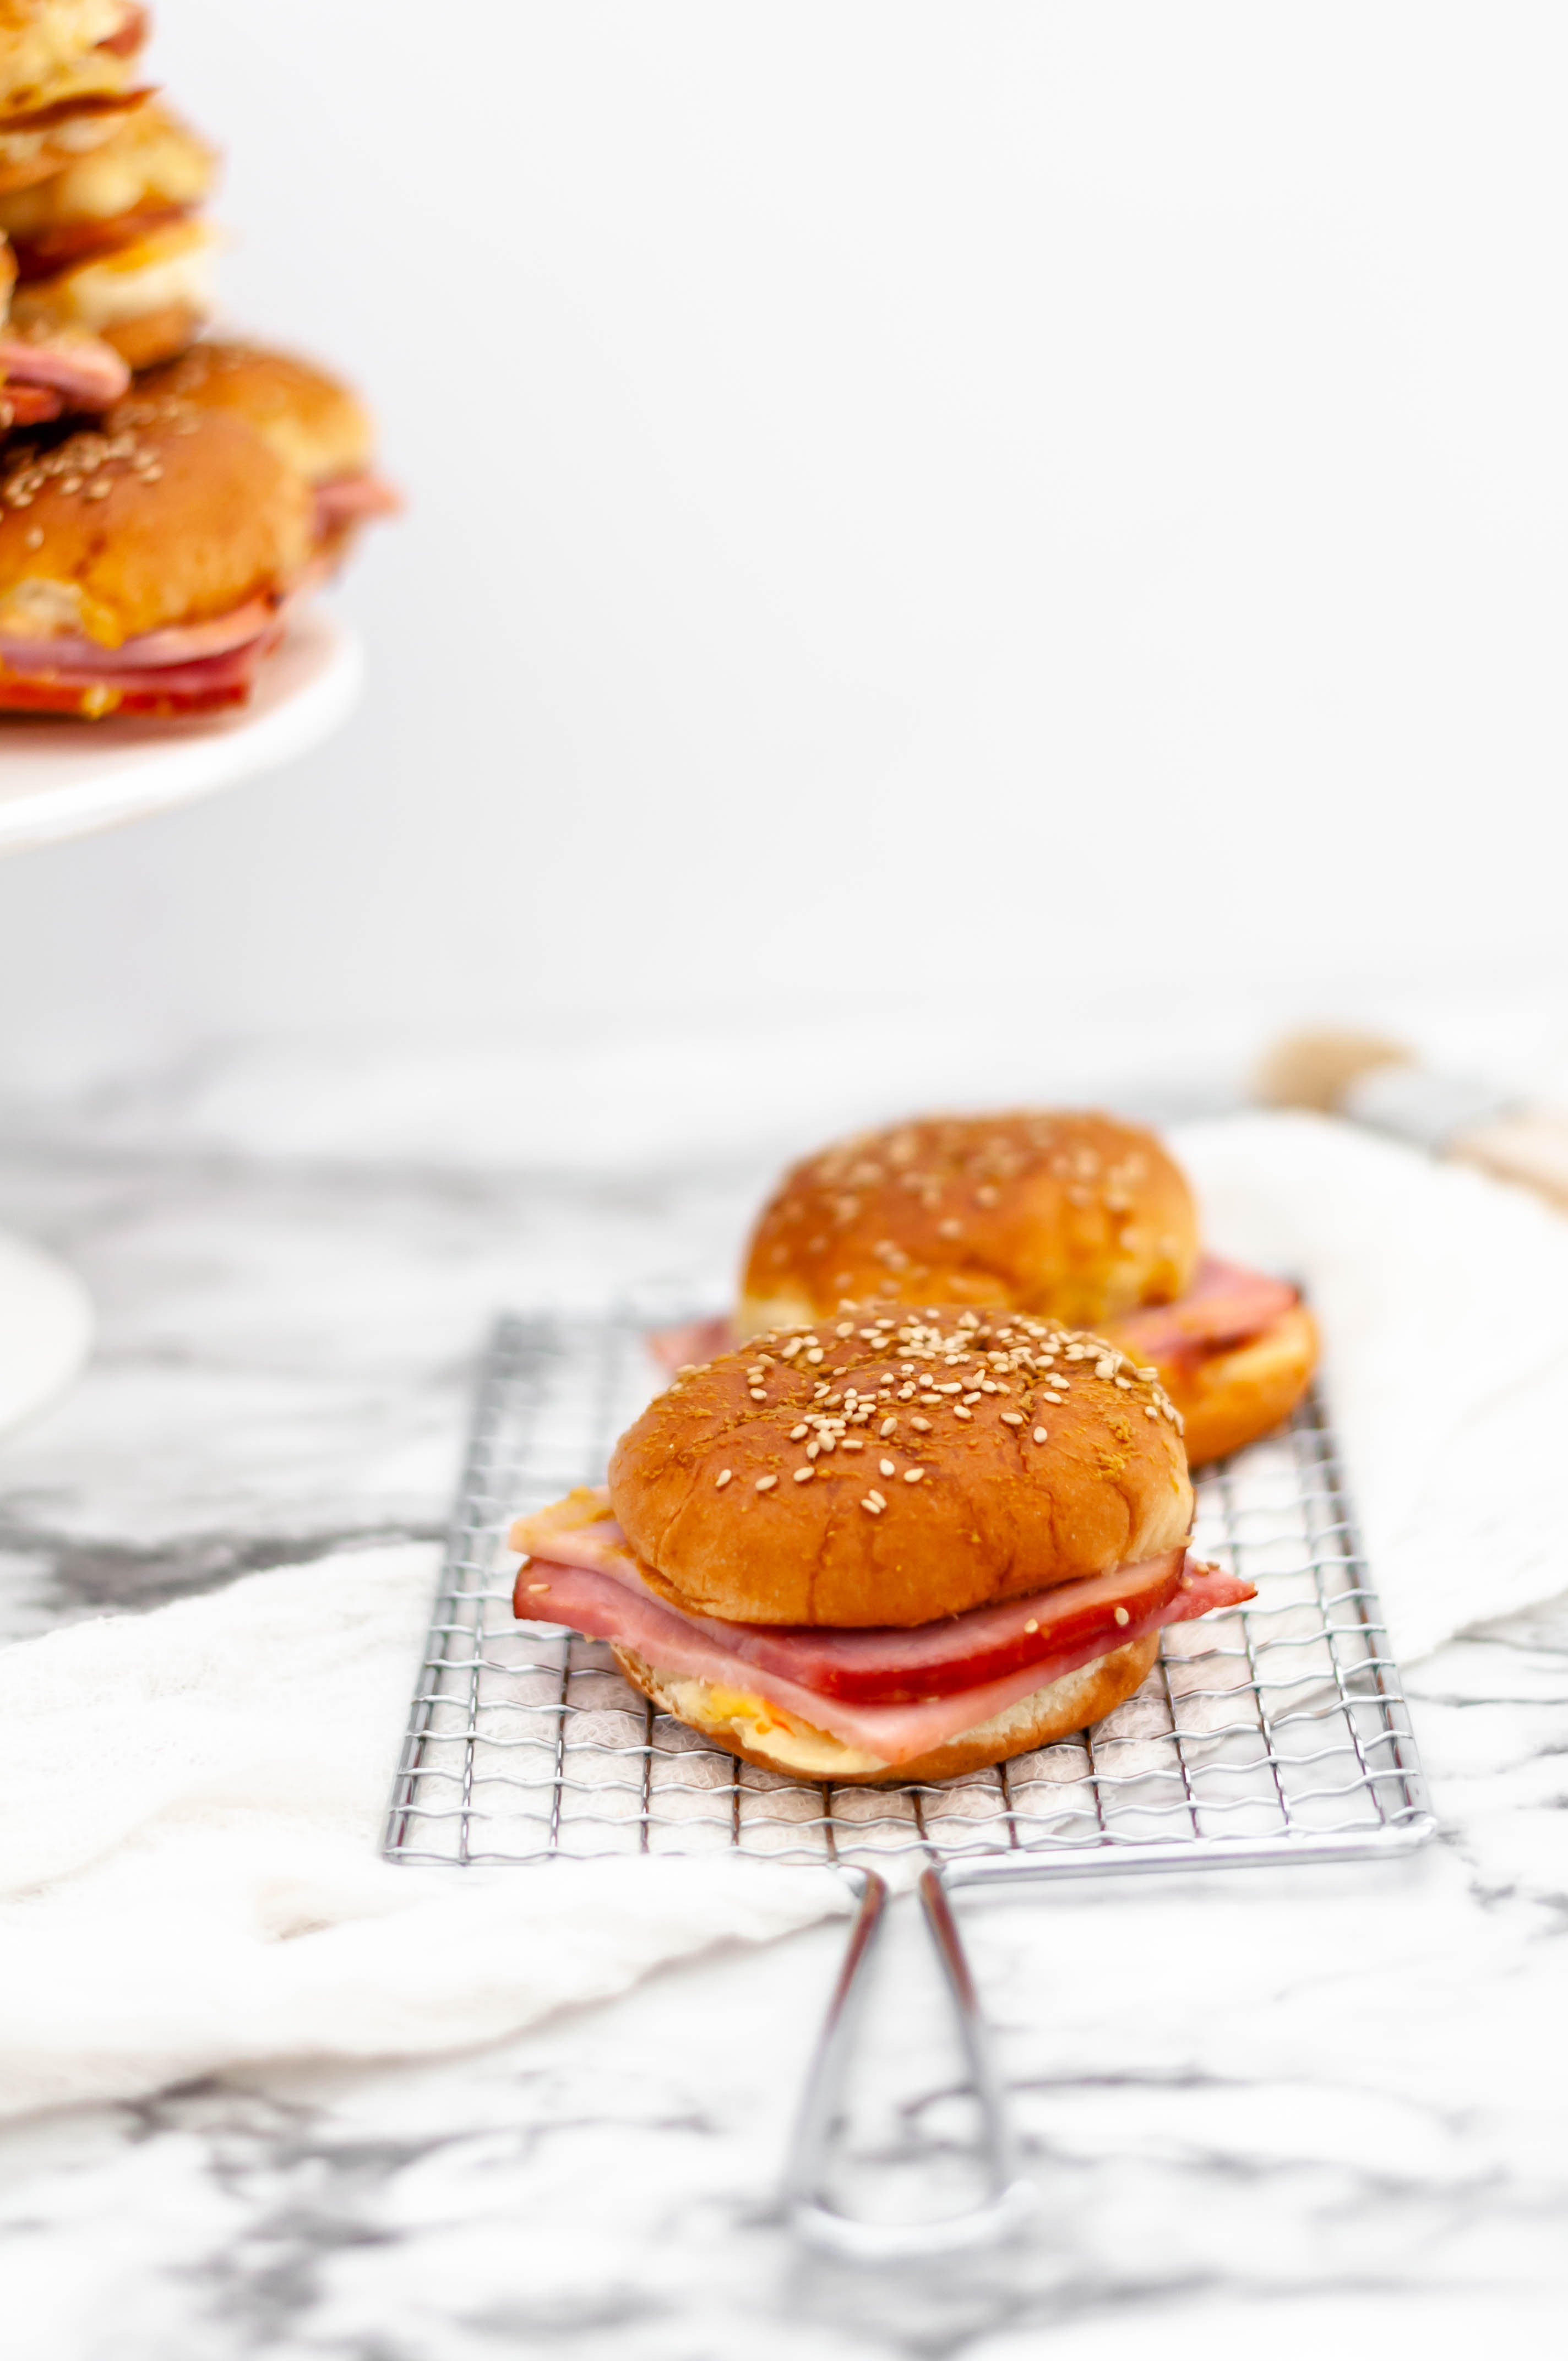 Put that leftover Easter ham to good use and make these Southern Ham Sliders. Sweet Hawaiian slider buns, creamy, flavorful pimento cheese and leftover ham slices make dinner a snap.